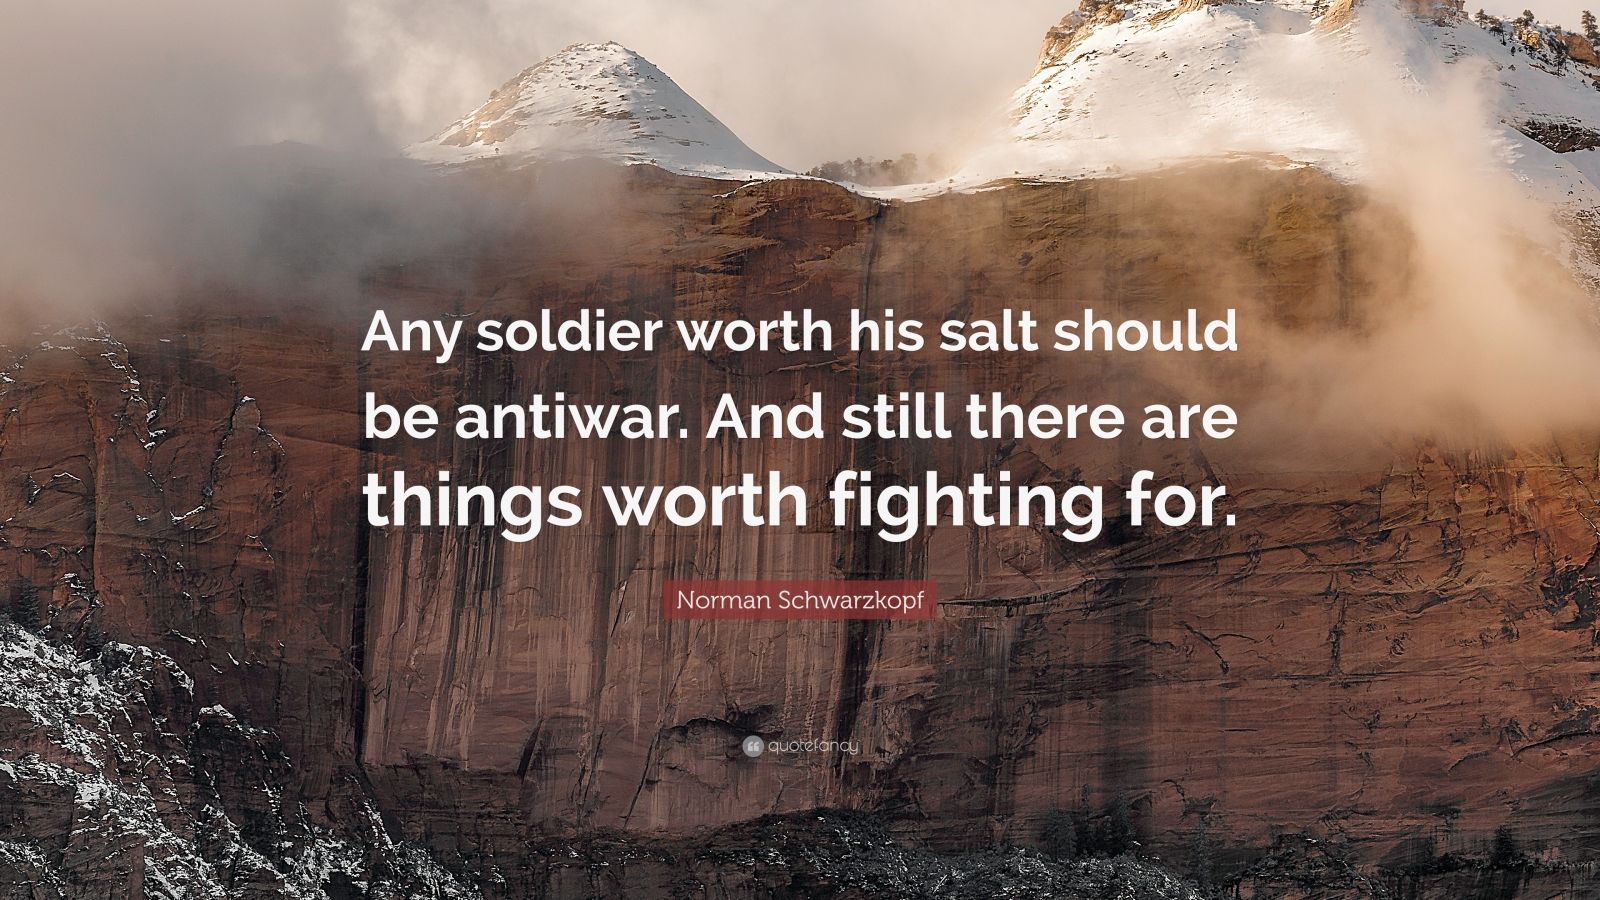 Norman Schwarzkopf Quote: “Any soldier worth his salt should be antiwar ...